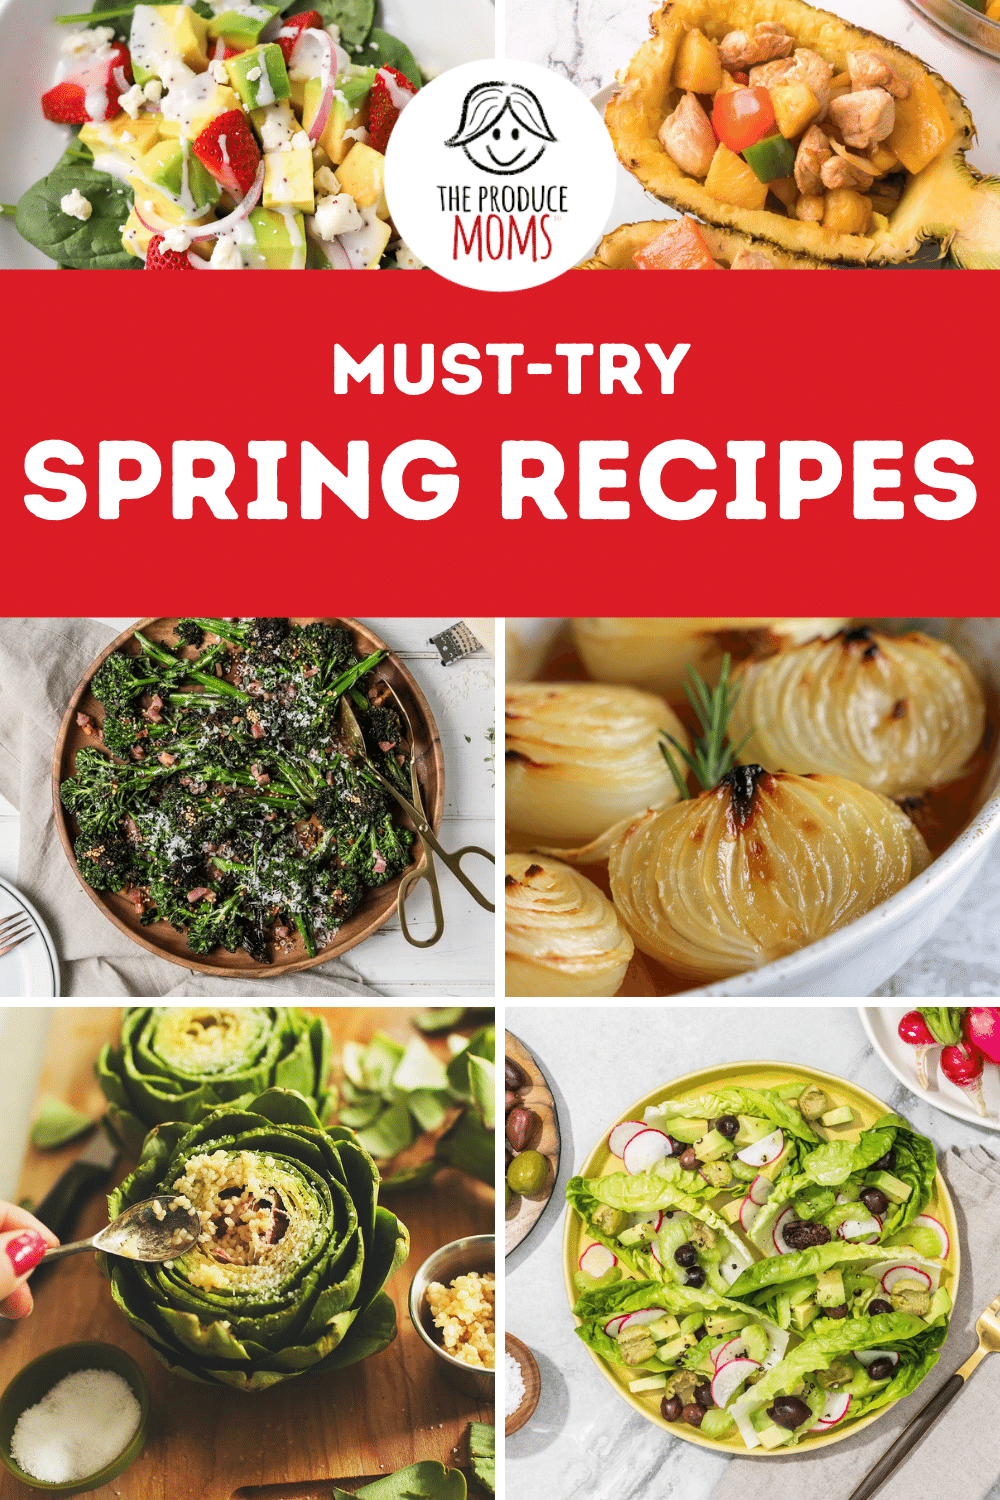 Must-try spring recipes